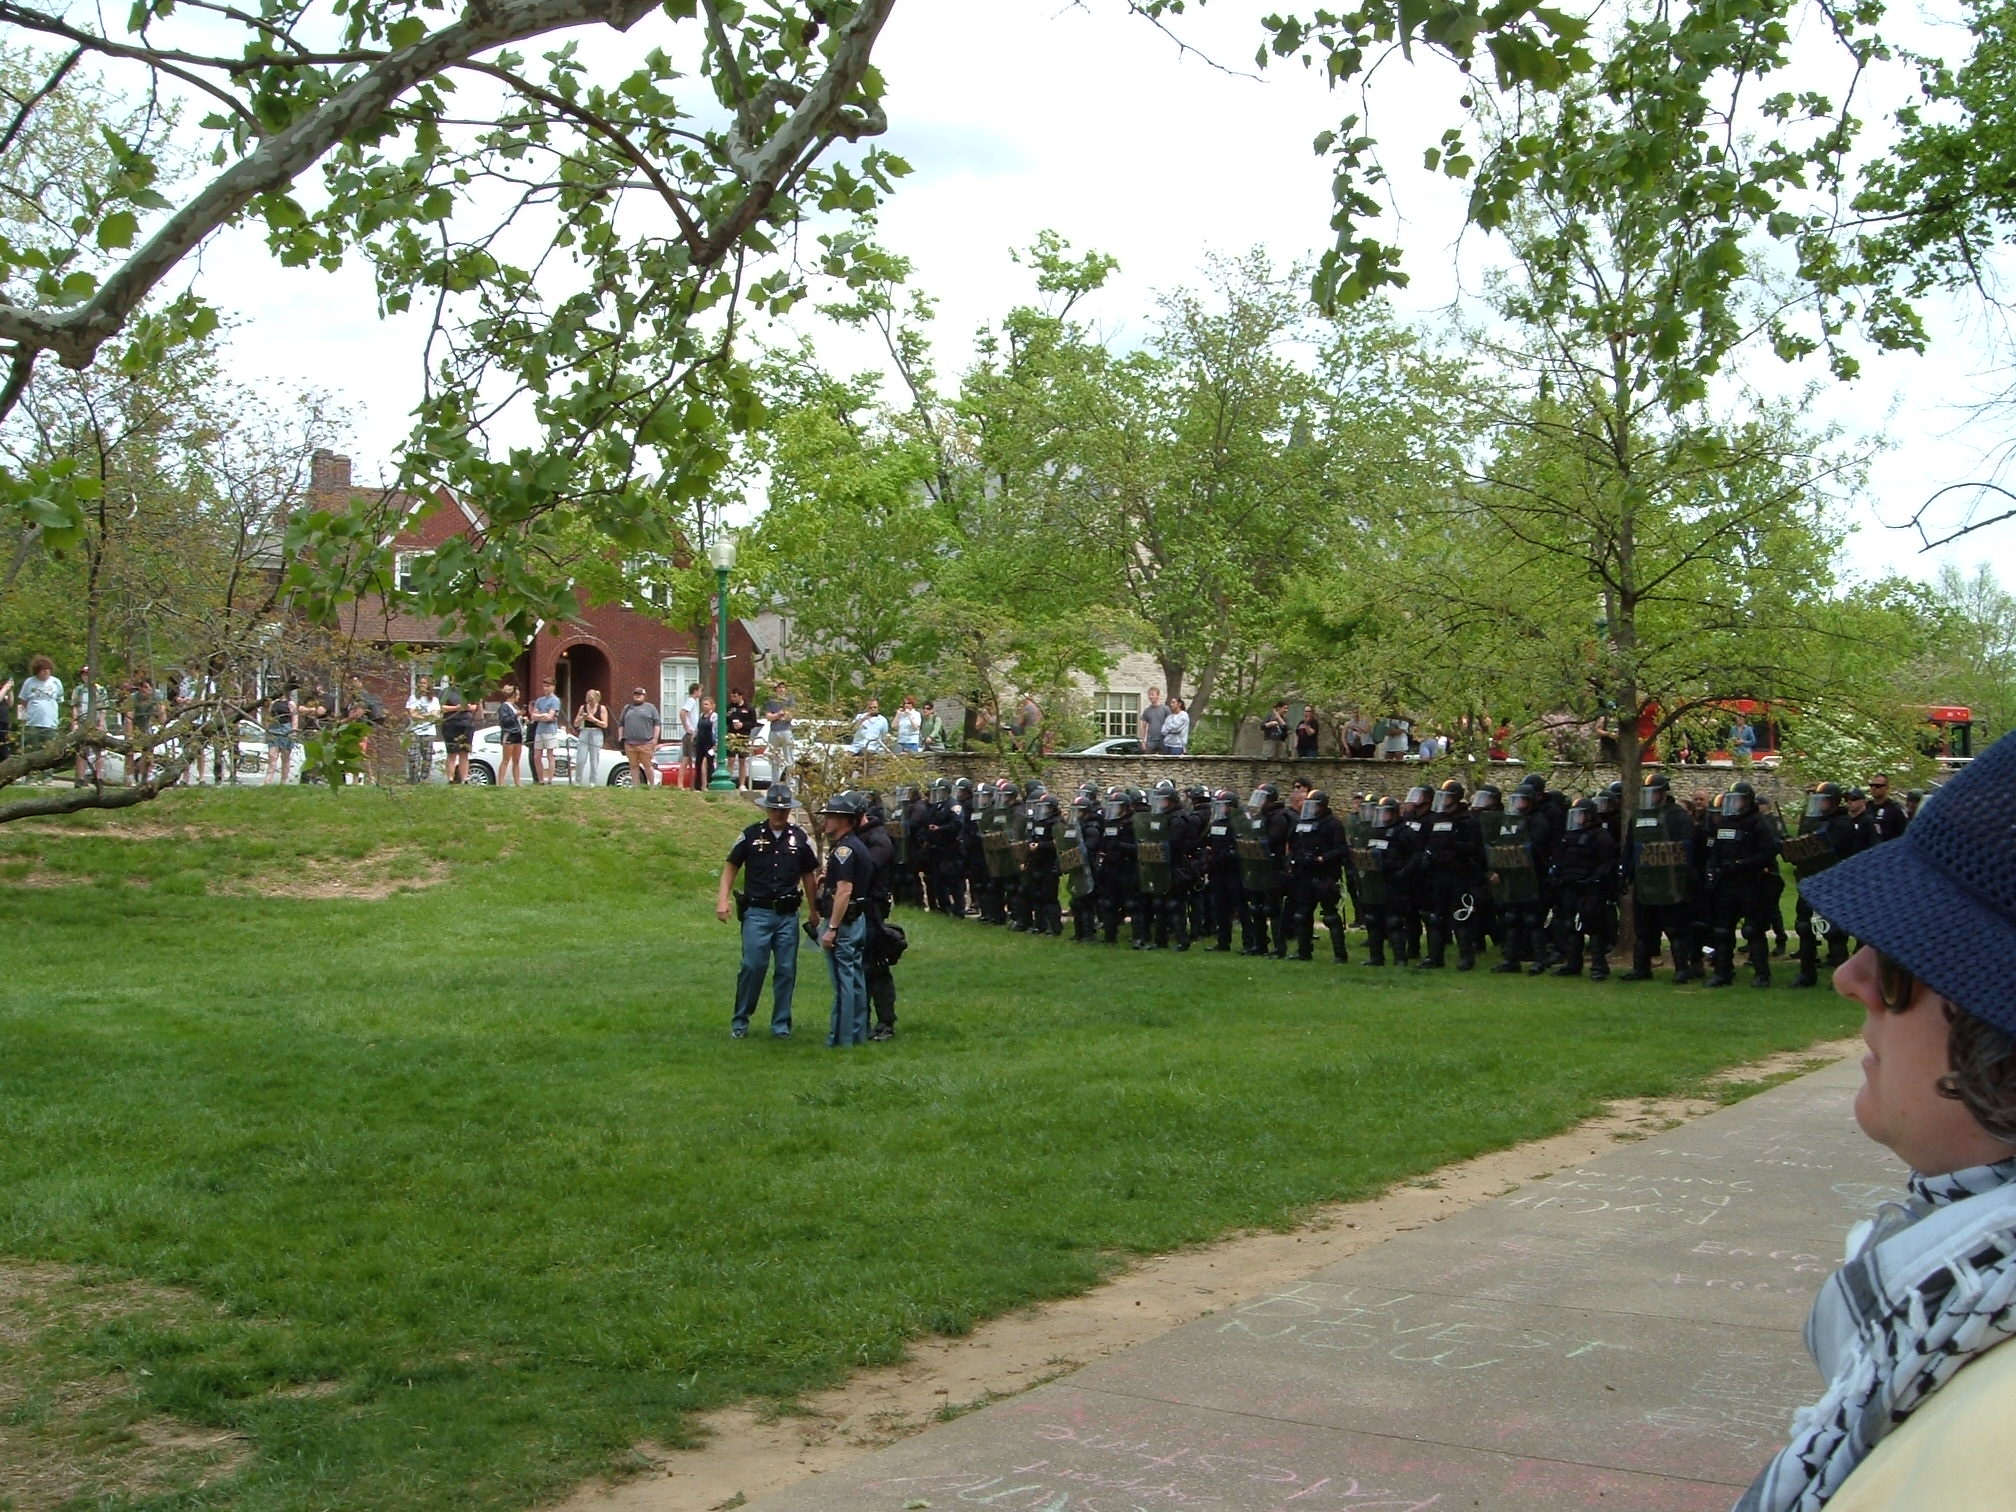 Indiana State Police in riot gear line up on the green grass of Dunn Meadow, waiting for the order to begin the raid. The commanding officers converse in a small group in front of the line.